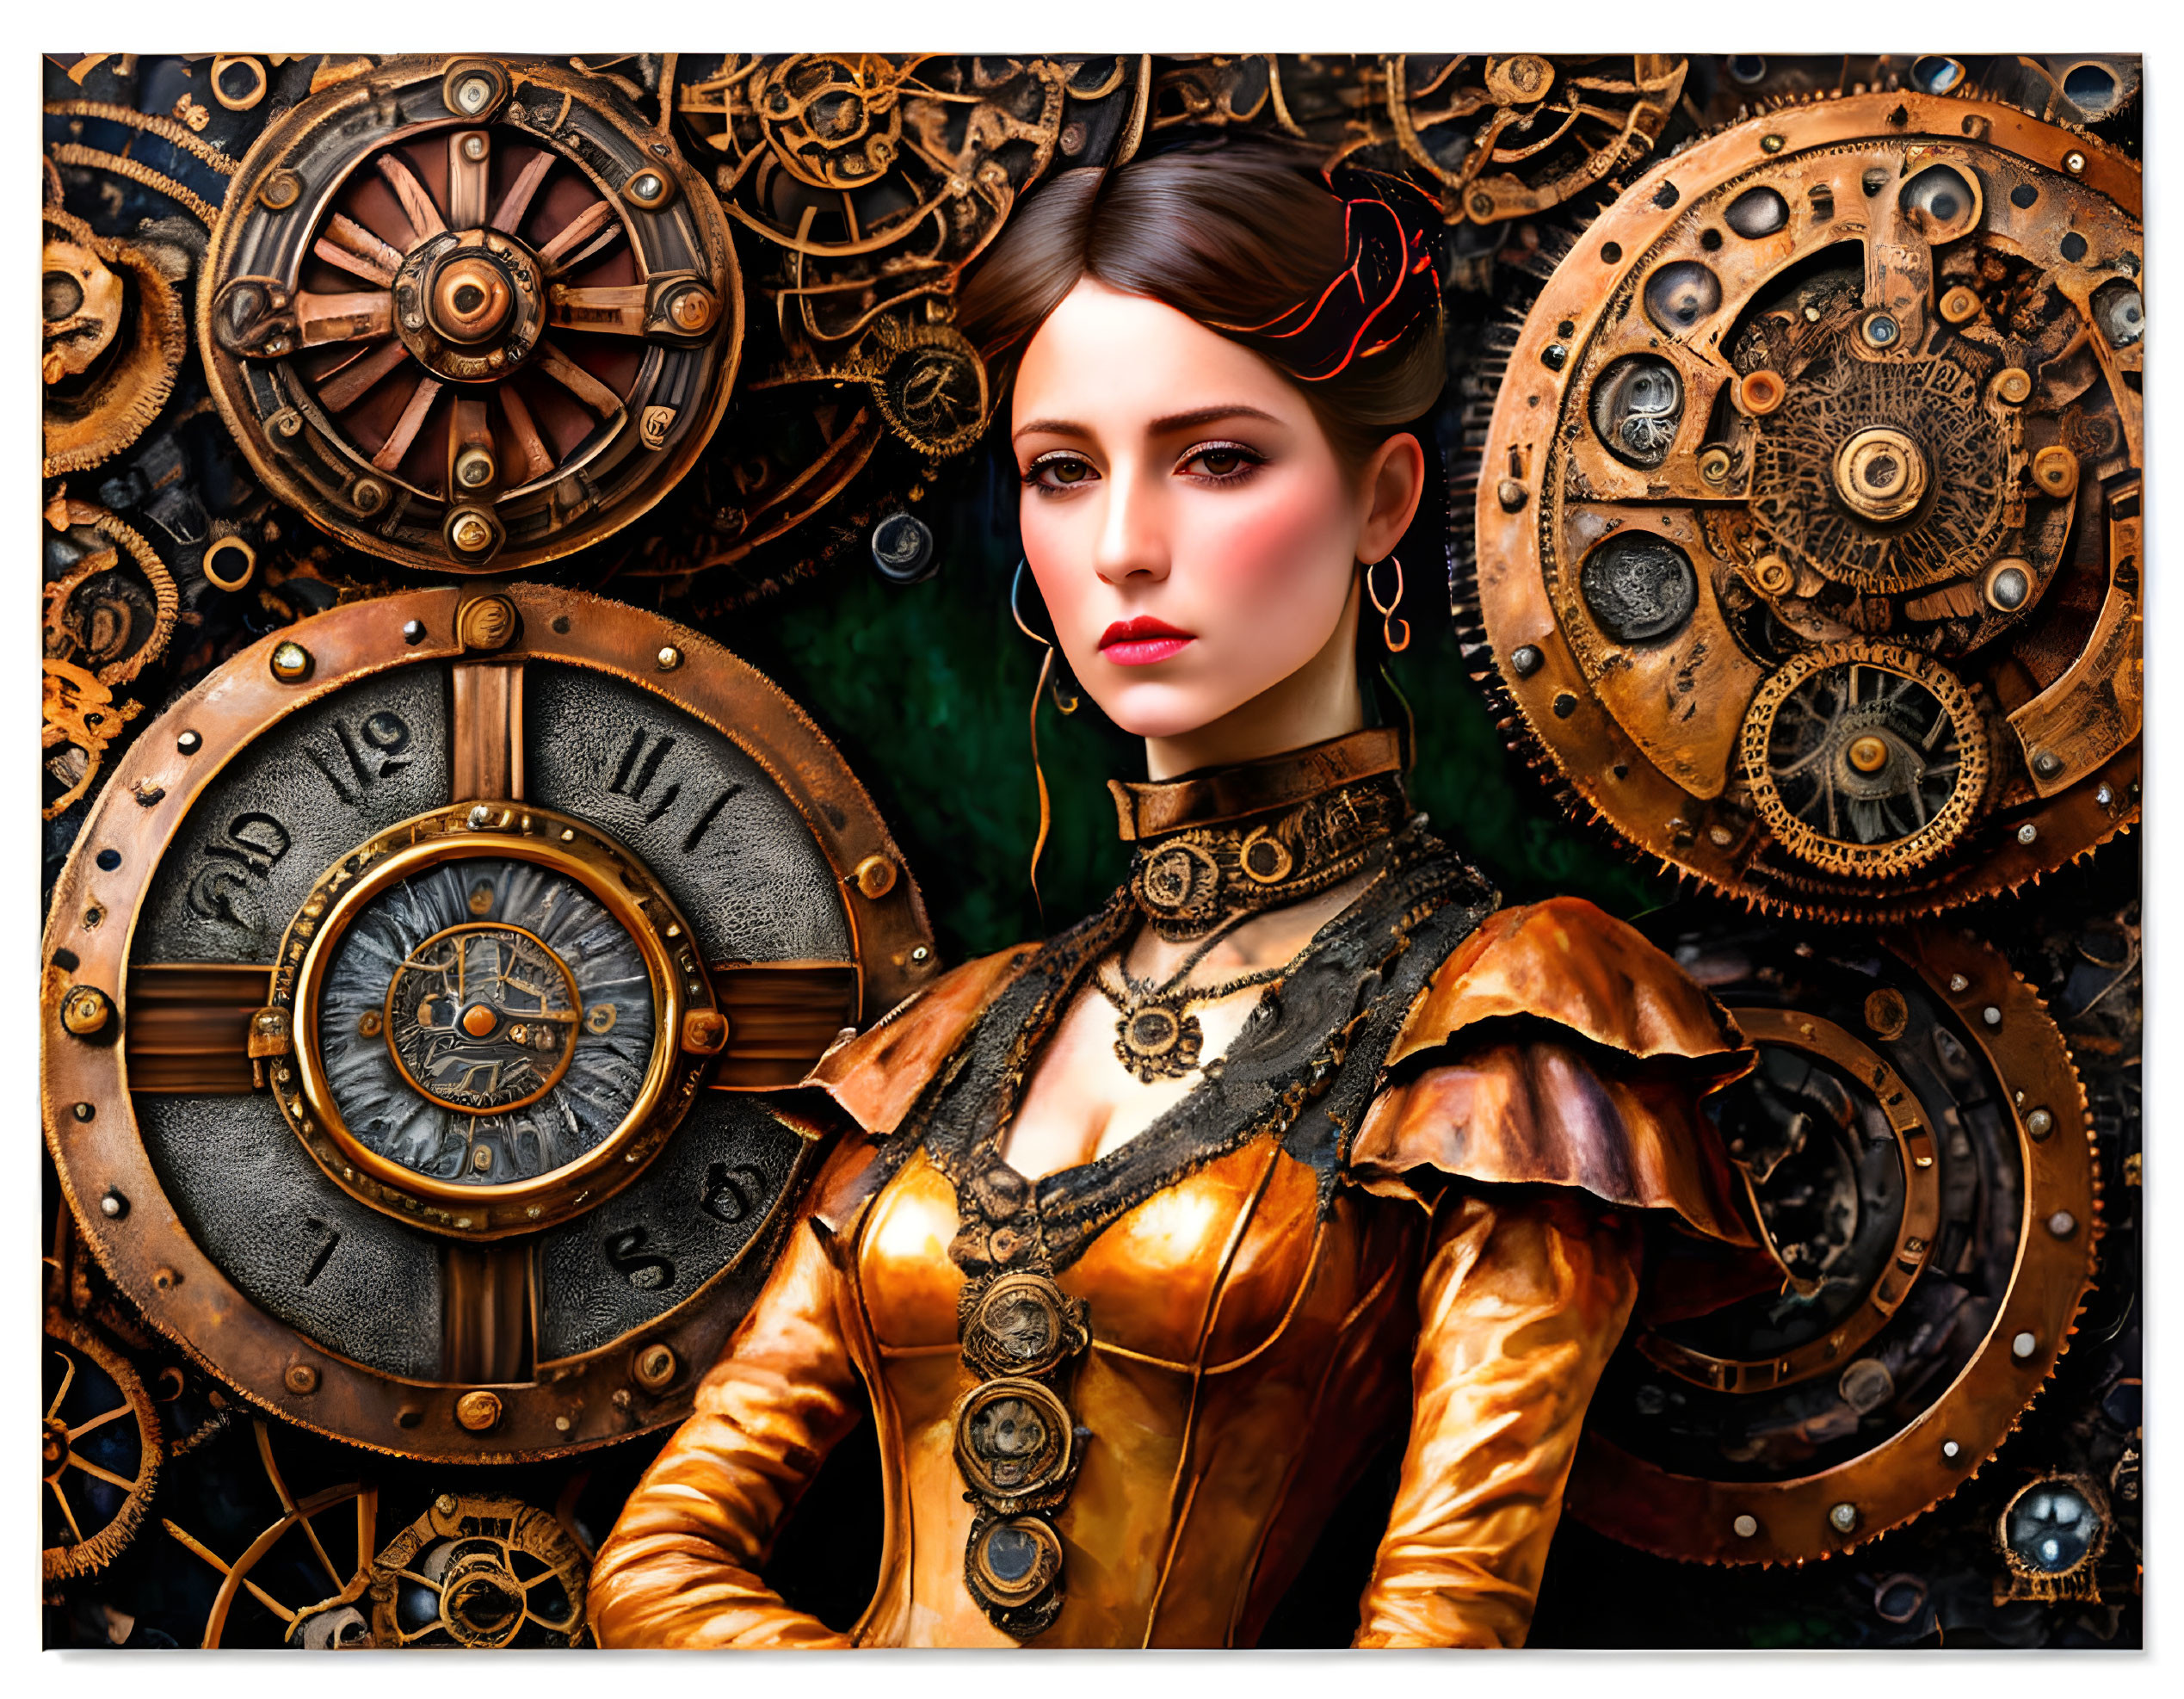 Steampunk-themed woman with cogwheel accessories in front of mechanical gears and clock parts